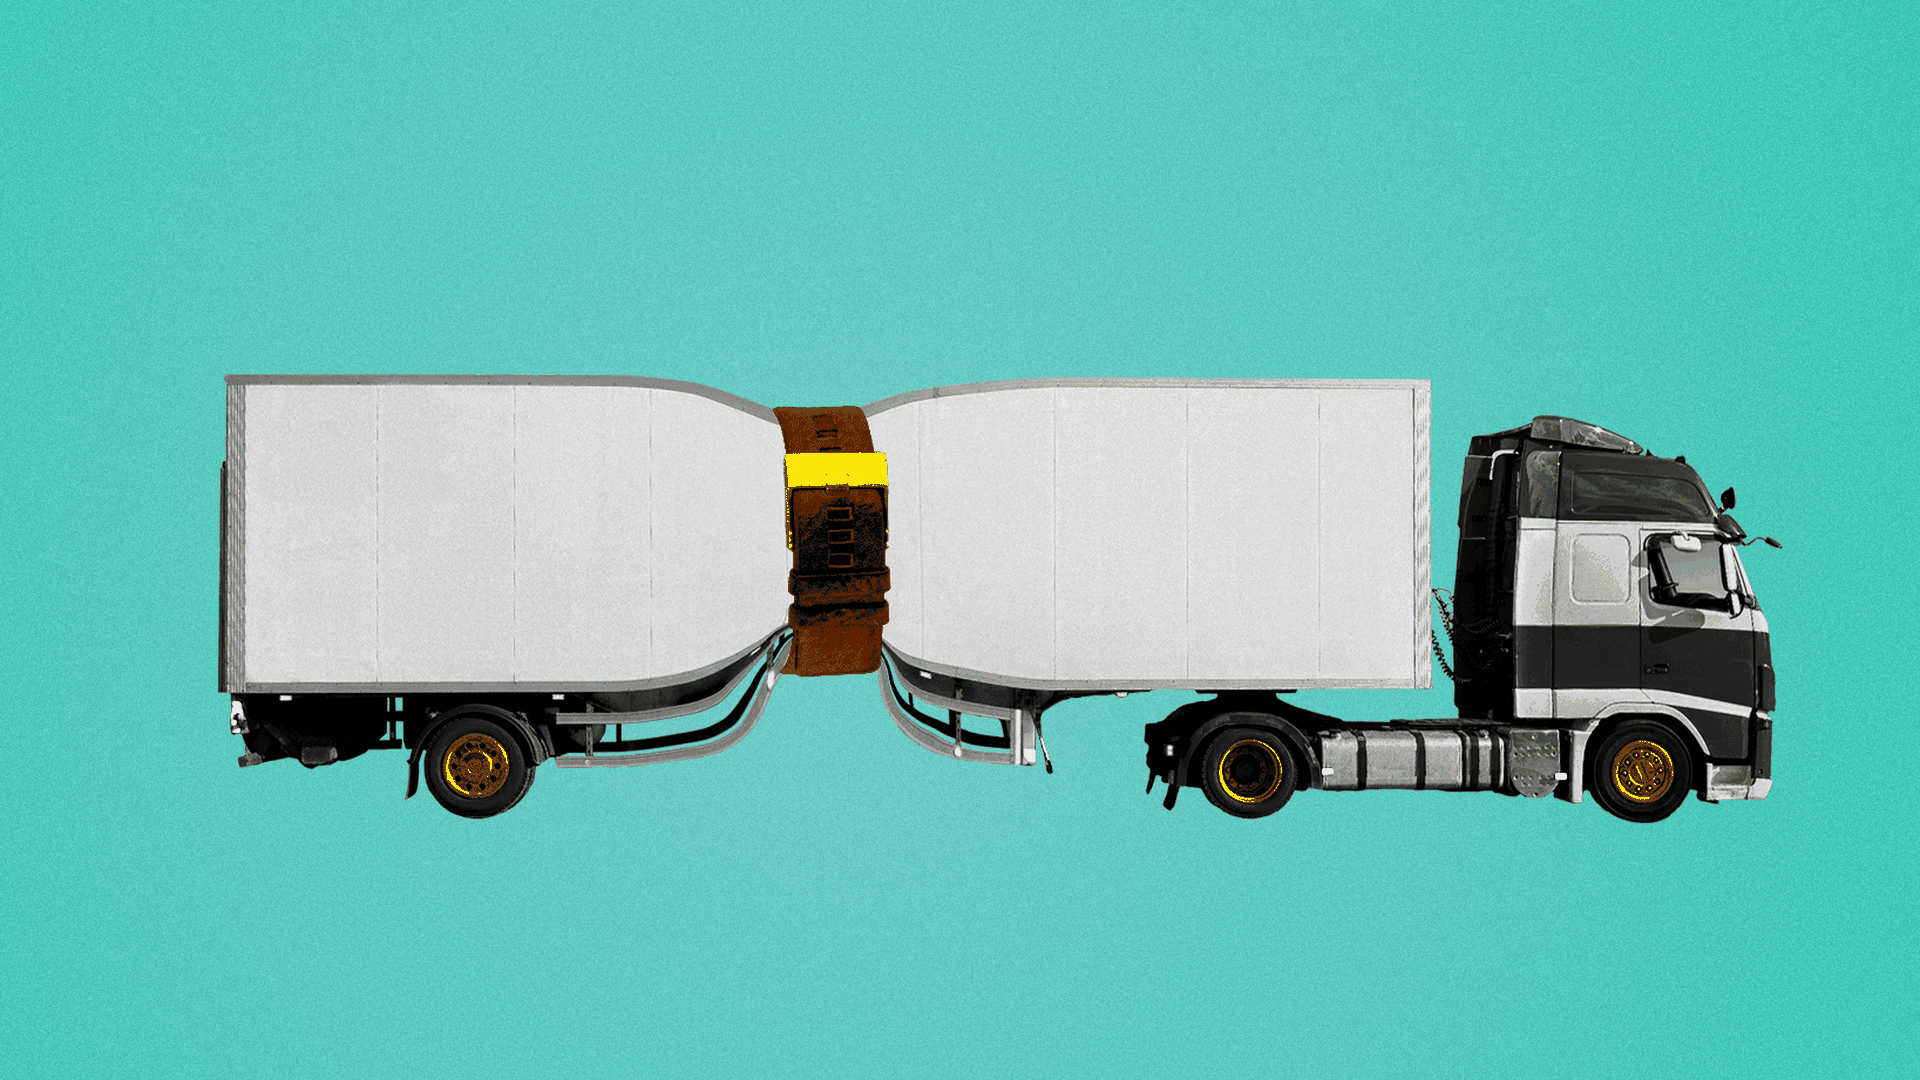 Illustration of a truck with a belt latched around its center.